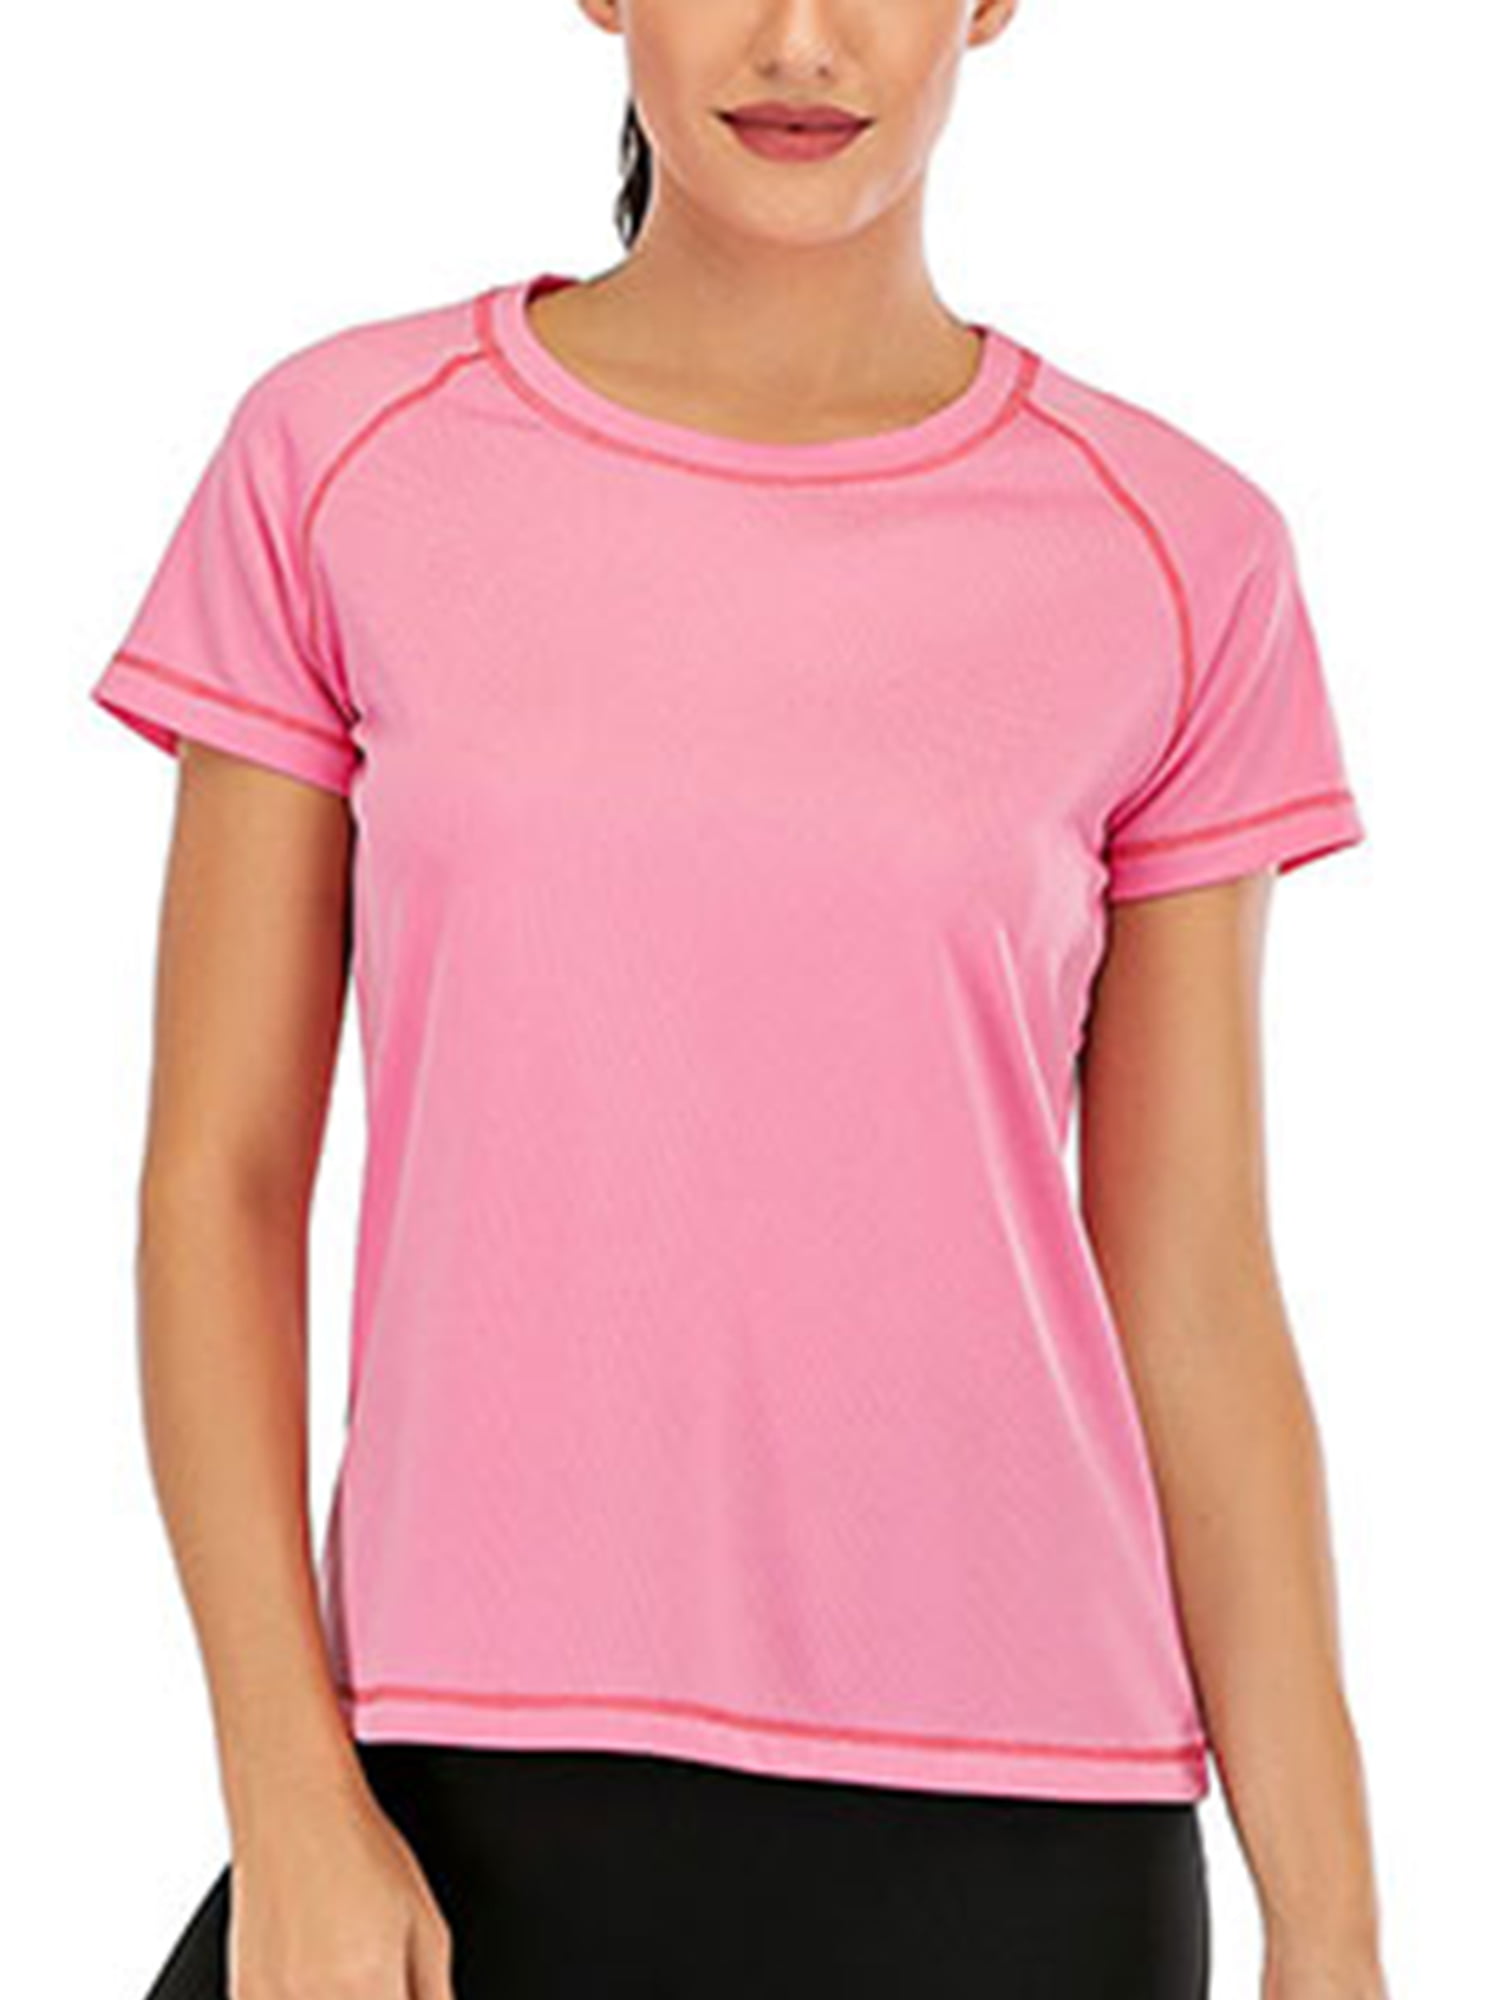 New Womens Breathable T Shirt Ladies Cool Dry Running Gym Top Wicking Sports Tee 